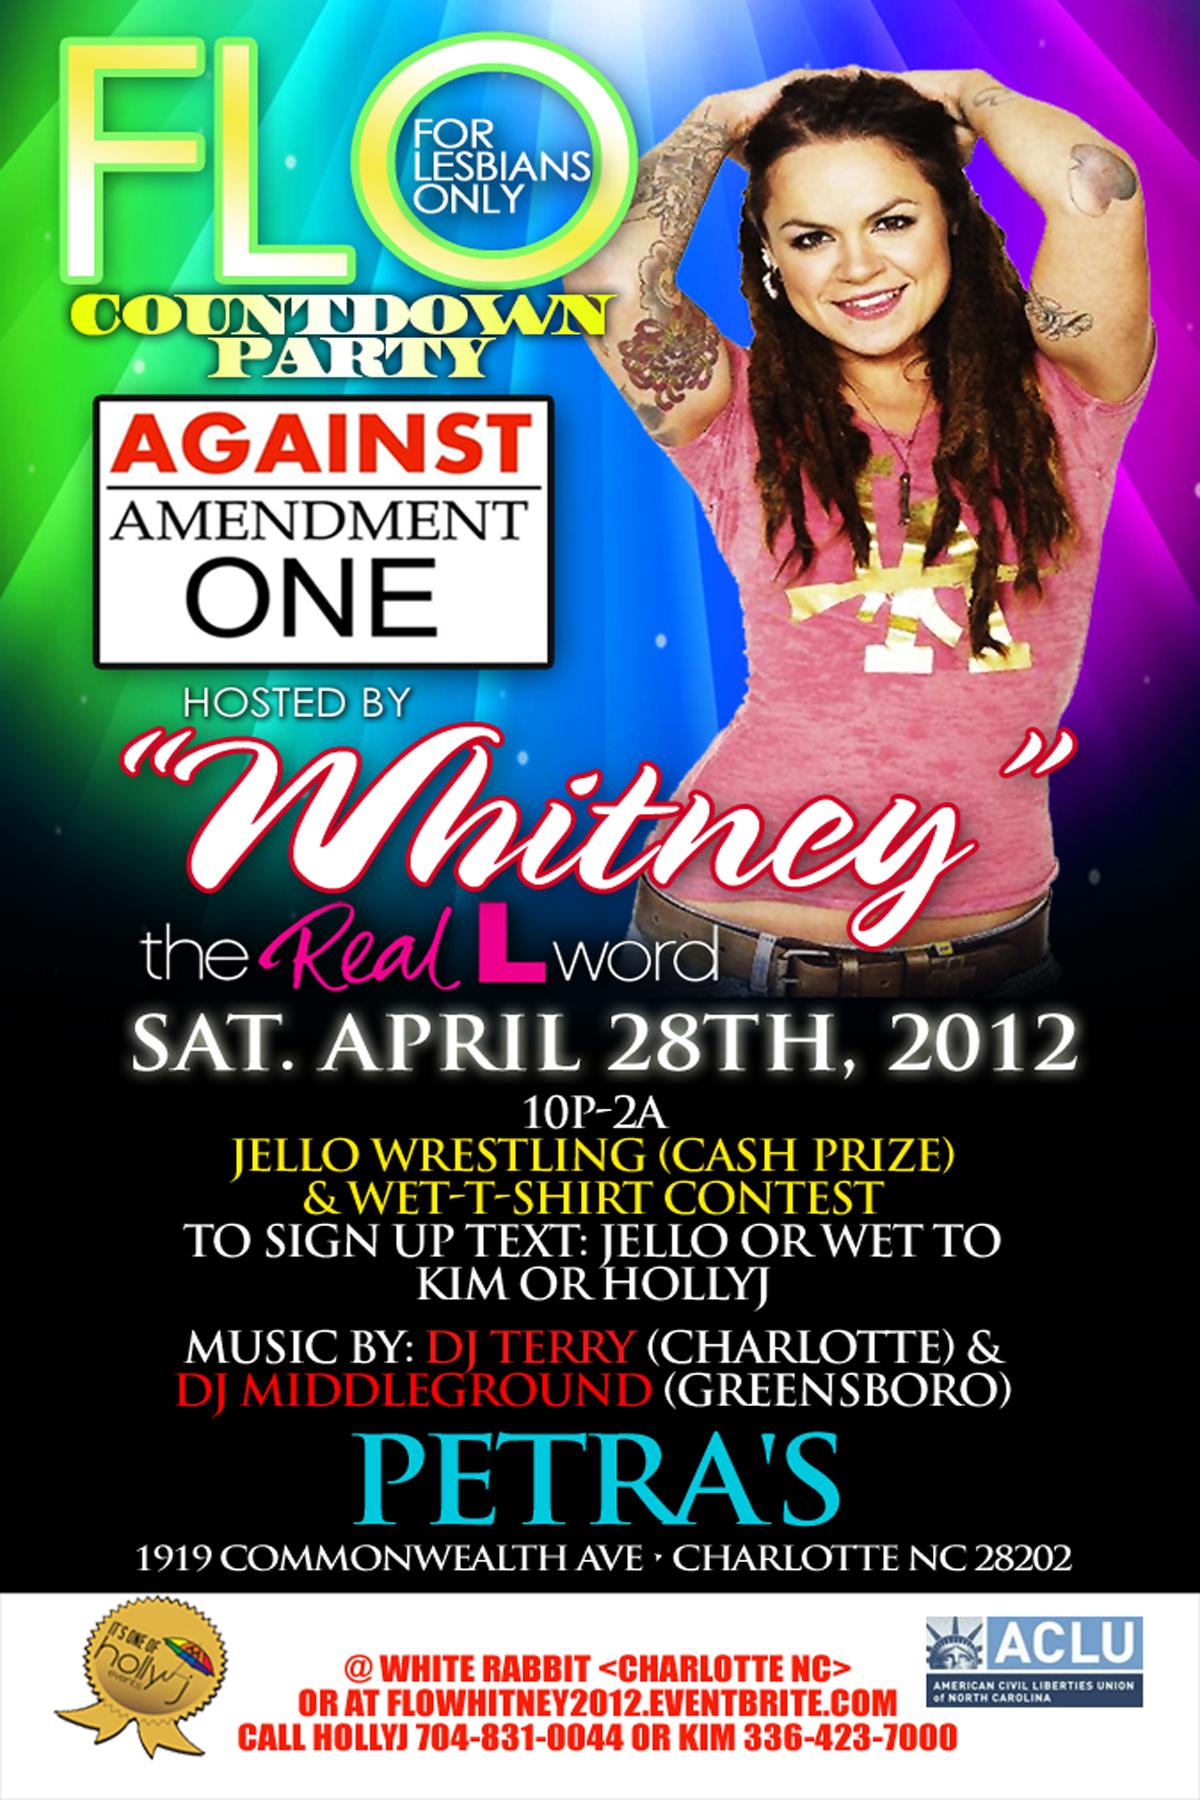 For Lesbians Only “Whitney Mixter” in Charlotte NC